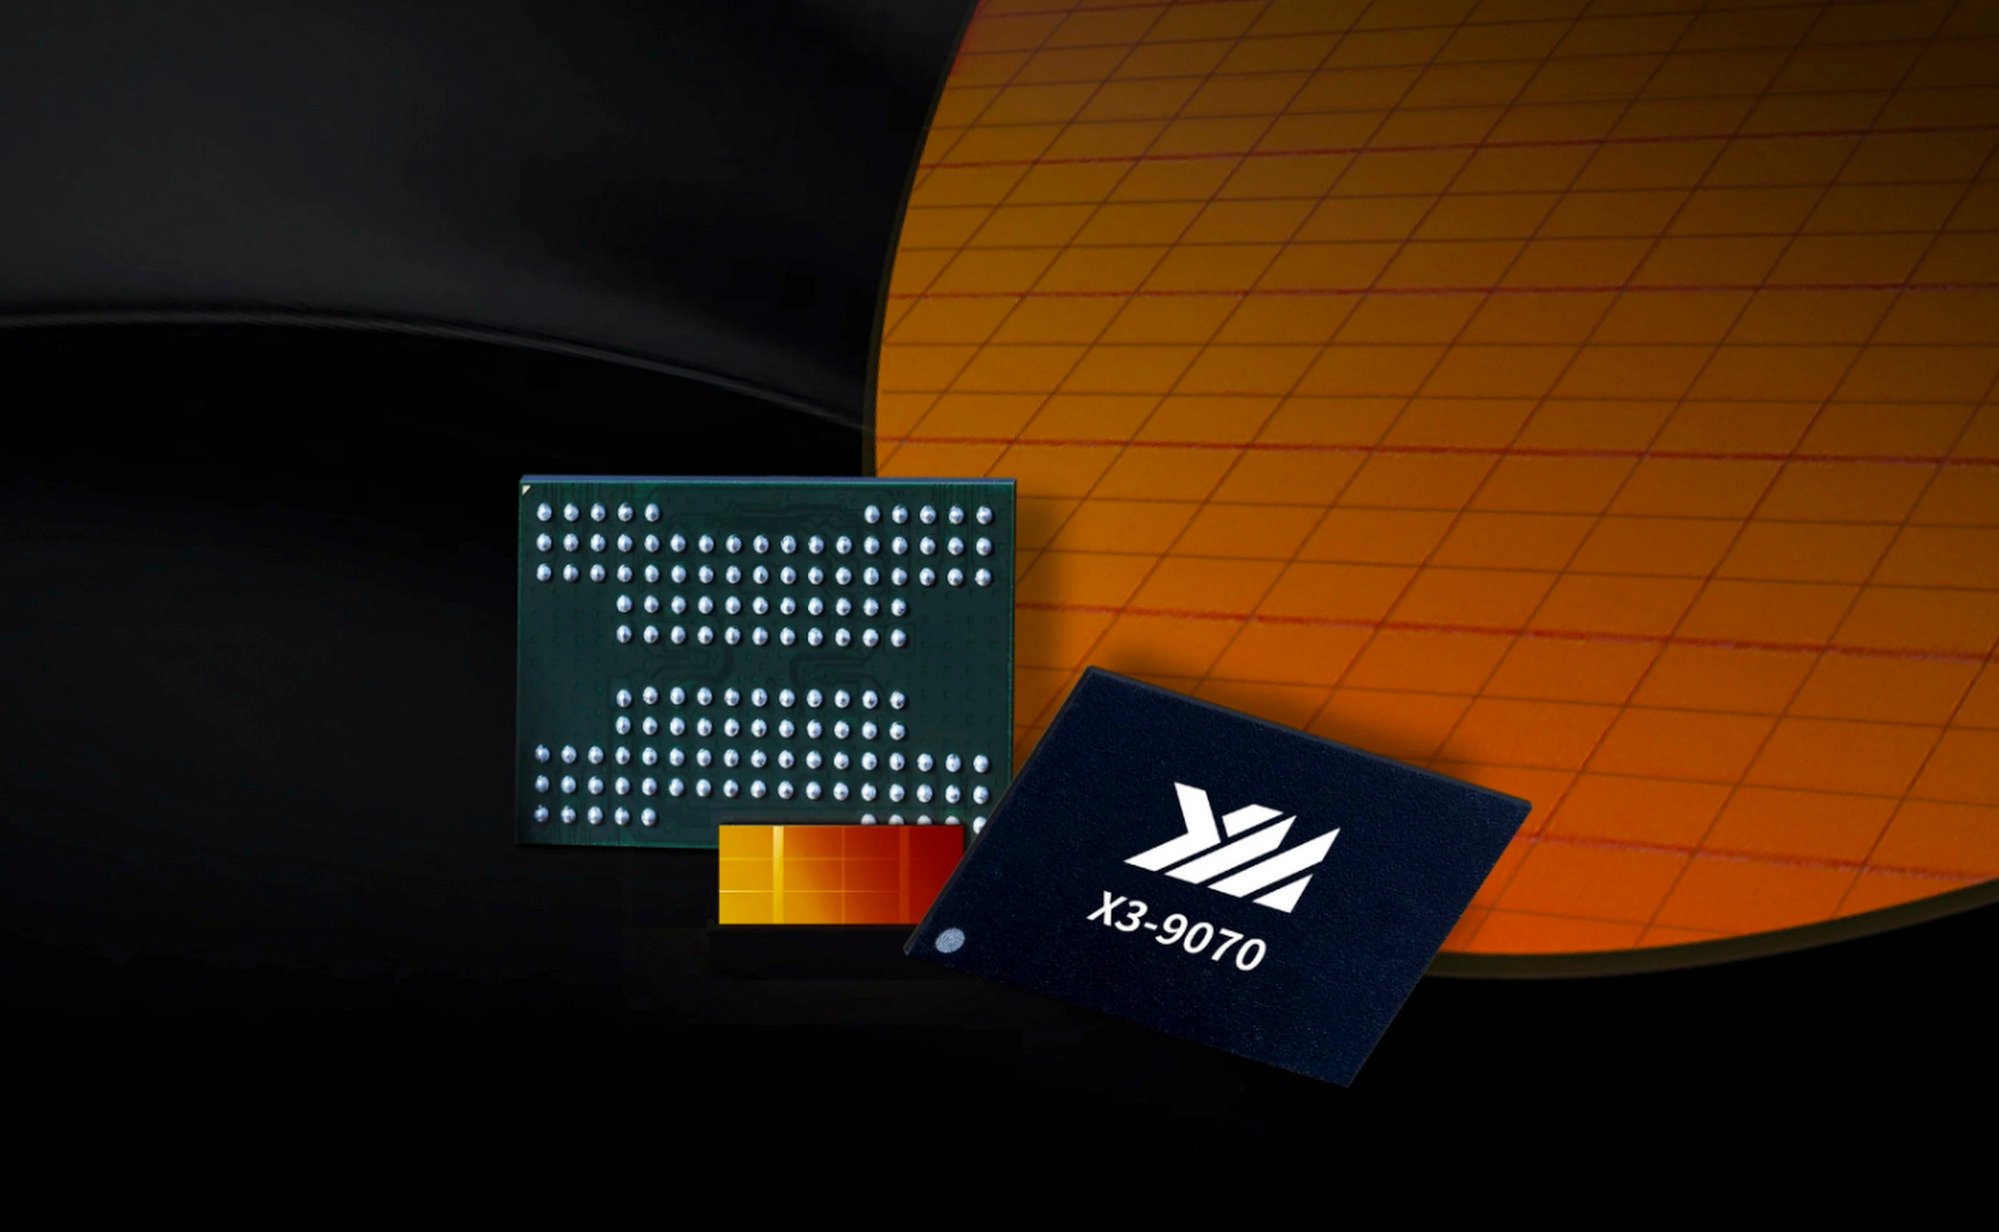 YMTC’s fourth-generation 3D flash memory chip. Photo: Handout